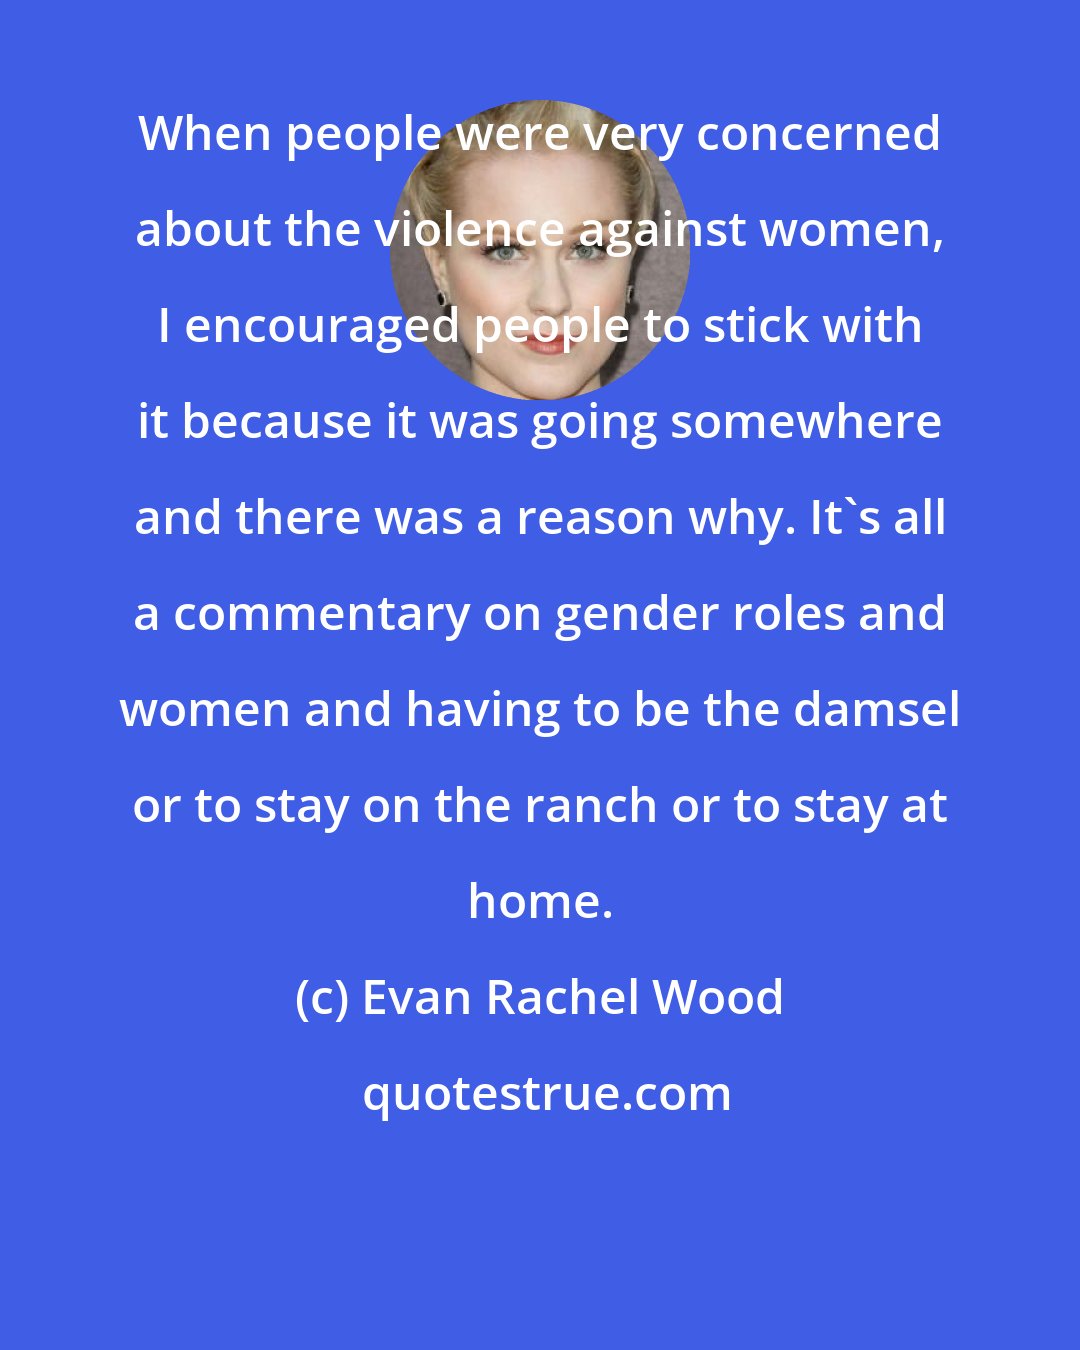 Evan Rachel Wood: When people were very concerned about the violence against women, I encouraged people to stick with it because it was going somewhere and there was a reason why. It's all a commentary on gender roles and women and having to be the damsel or to stay on the ranch or to stay at home.